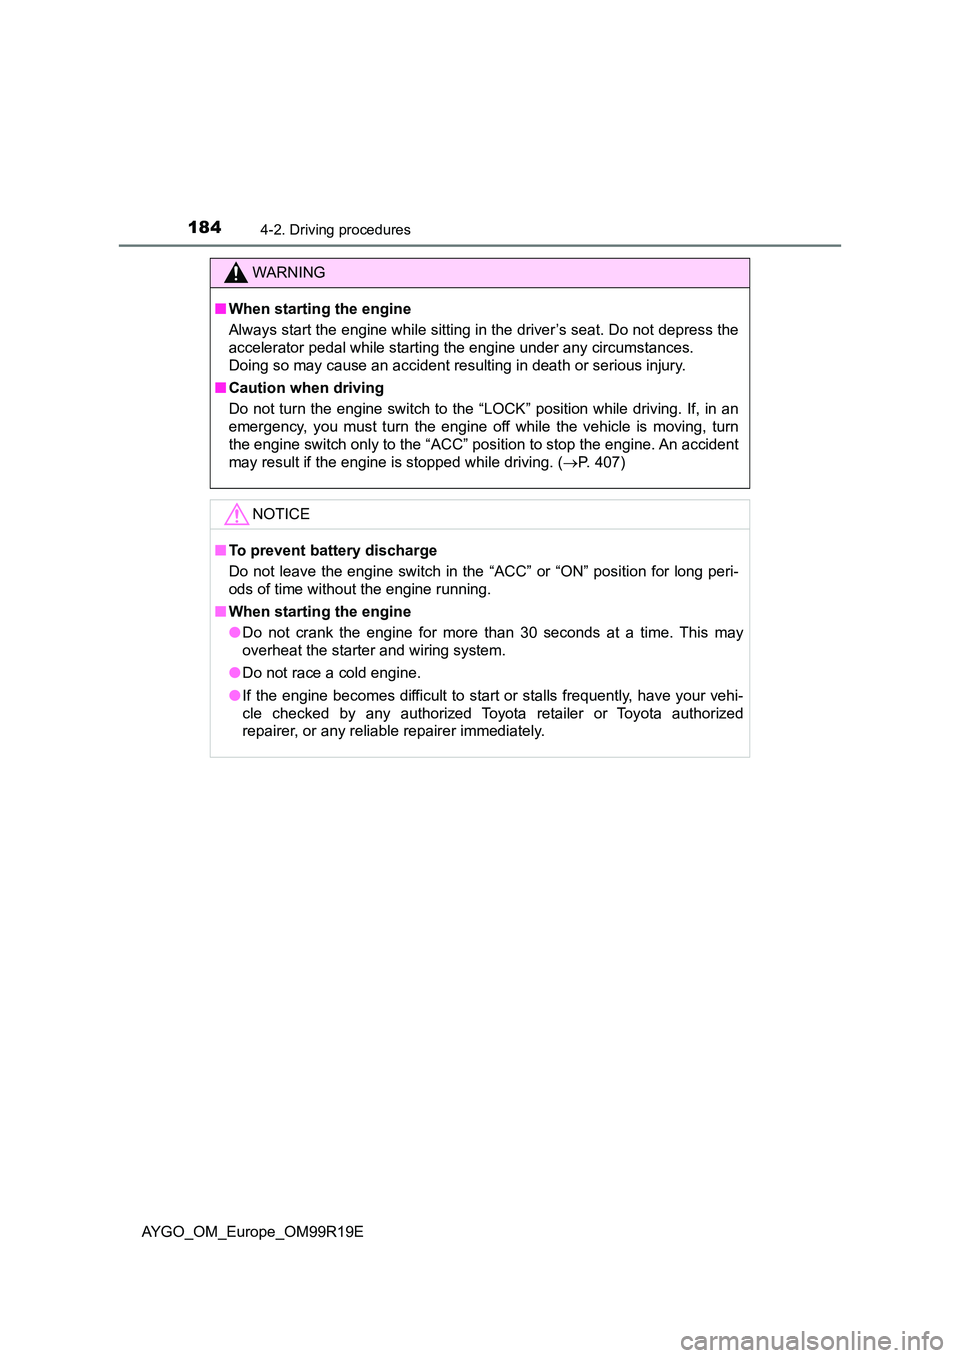 TOYOTA AYGO 2019  Owners Manual (in English) 1844-2. Driving procedures
AYGO_OM_Europe_OM99R19E
WARNING
■When starting the engine 
Always start the engine while sitting in the driver’s seat. Do not depress the 
accelerator pedal while starti